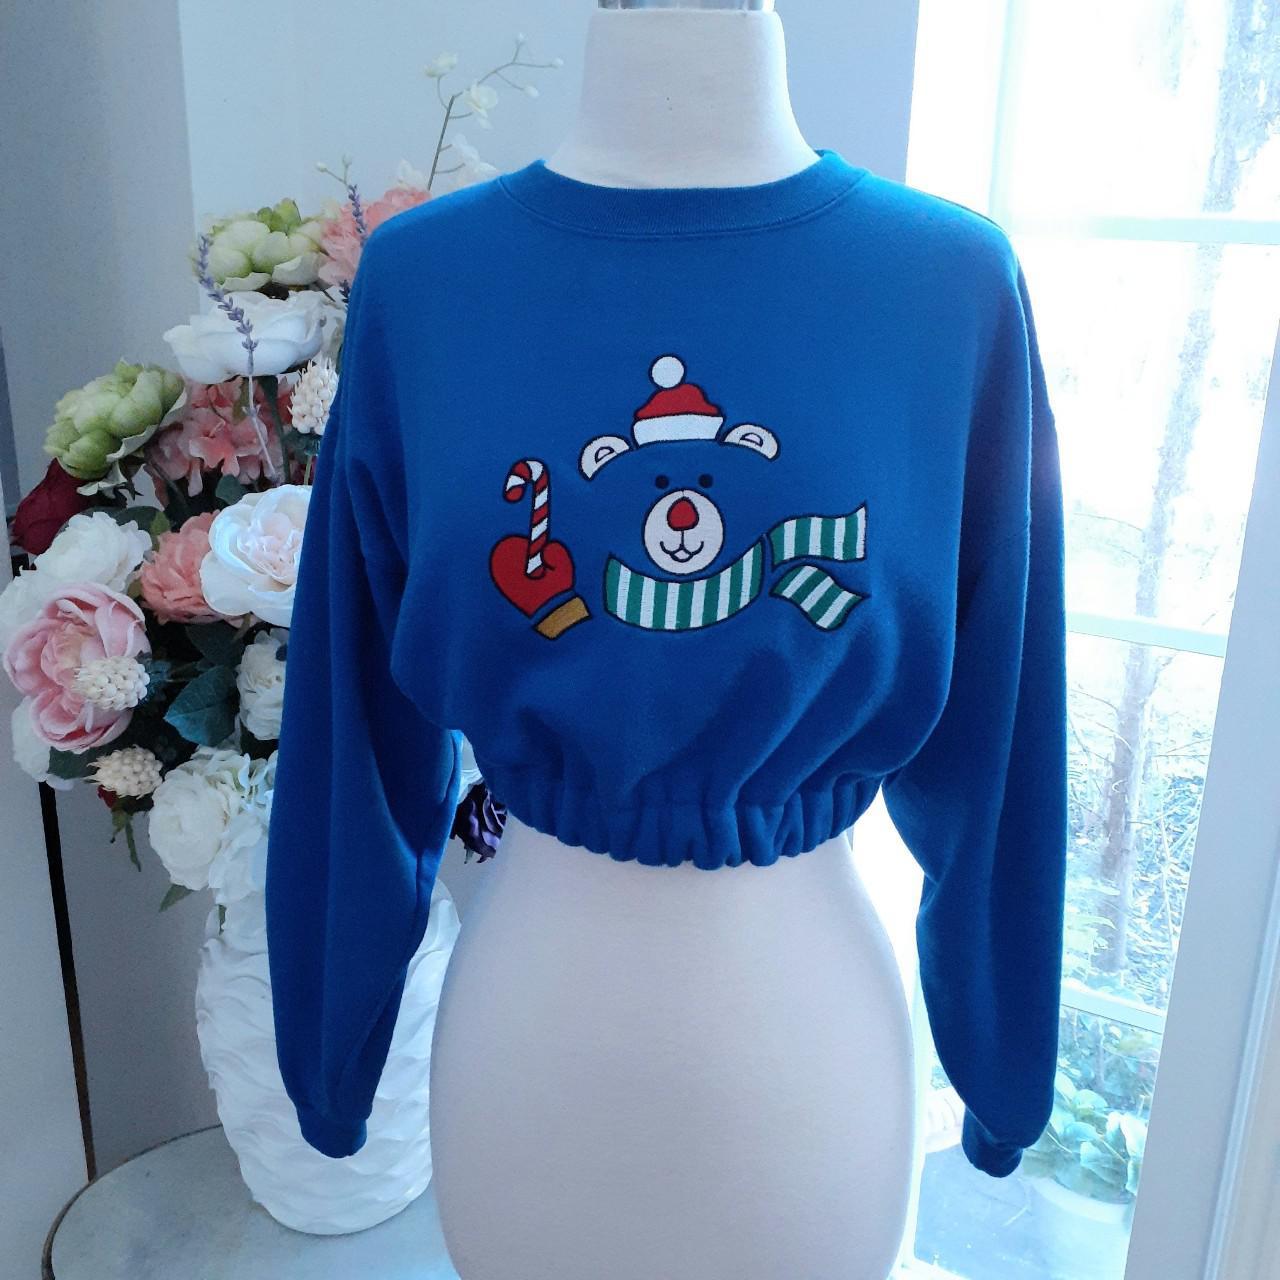 Product Image 1 - Adorable blue Polar bear embroidered